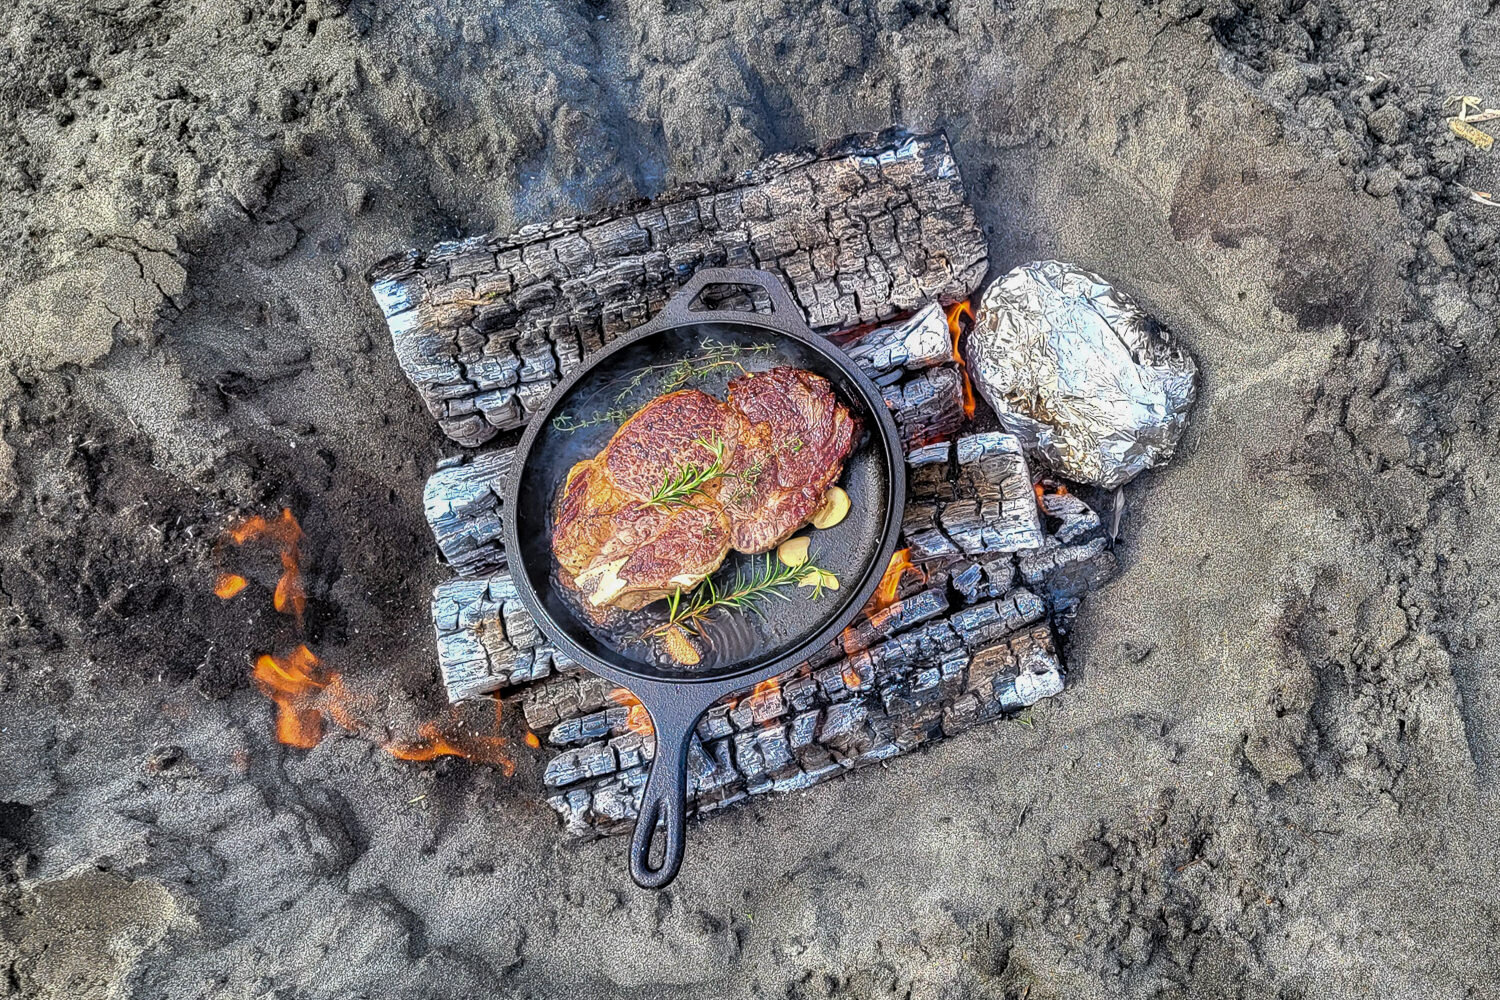 Using the Lodge Dutch Oven Combo Cooker to sear a ribeye steak over the fire - potatoes are wrapped in foil on the side